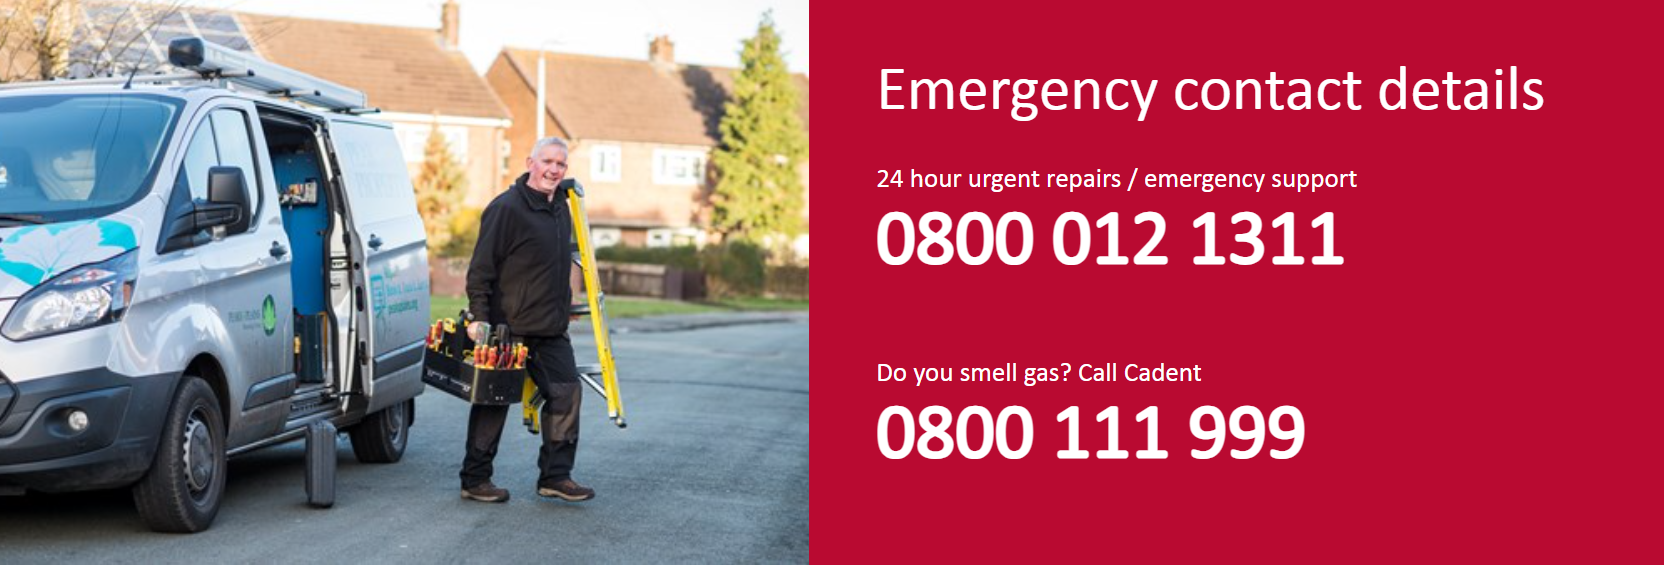 Emergency contact details - 0800 012 1311